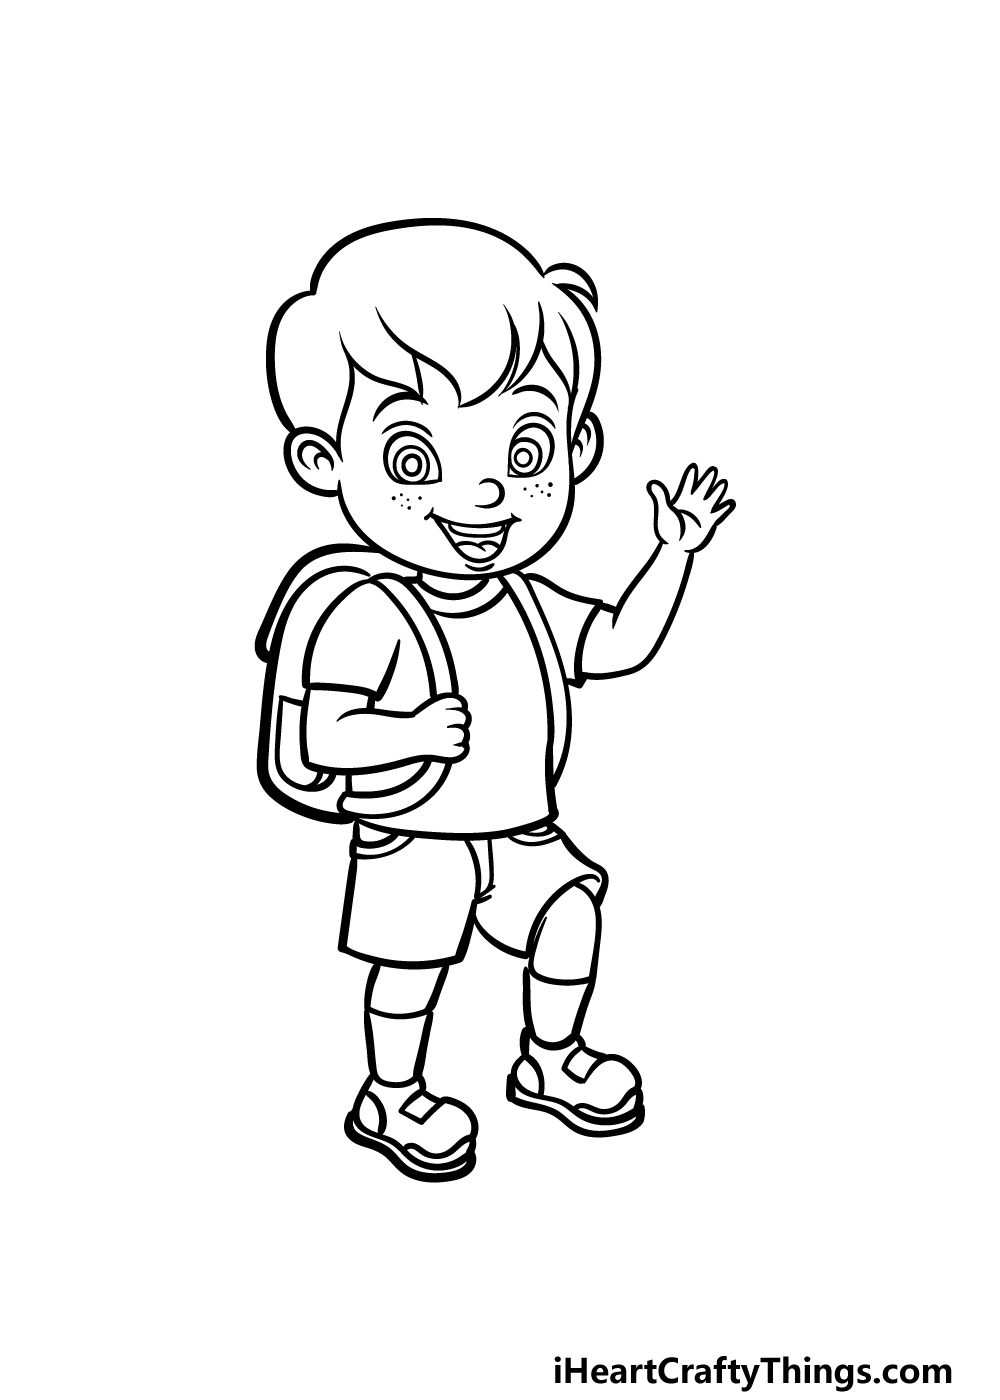 how to draw a Little Boy step 5